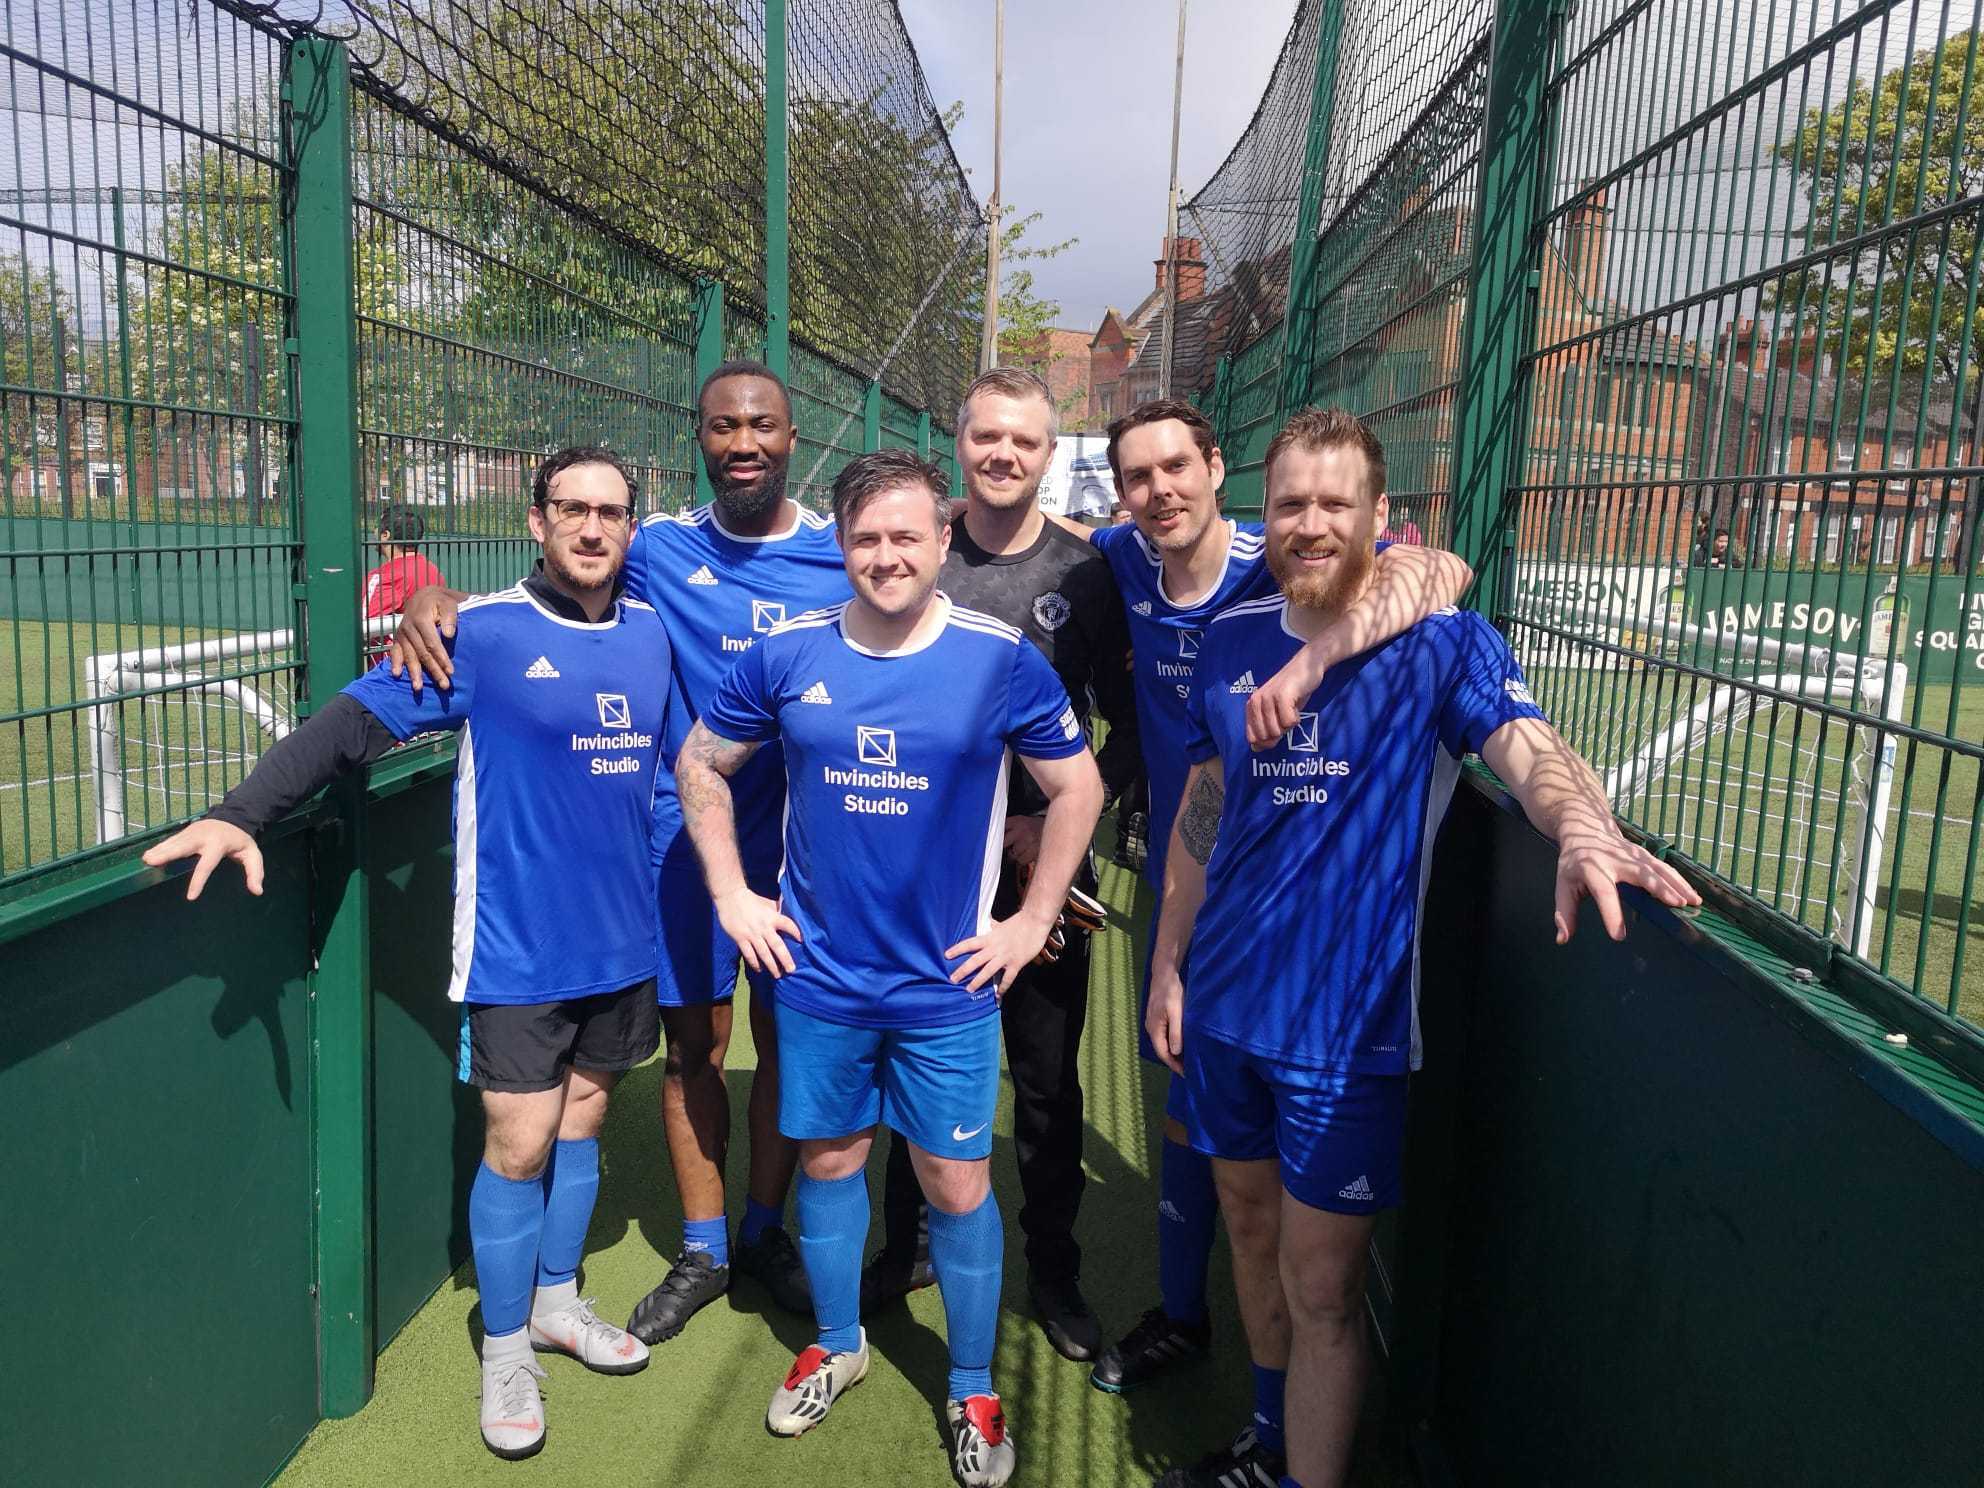 The Invincibles Team Kick-On for SpecialEffect